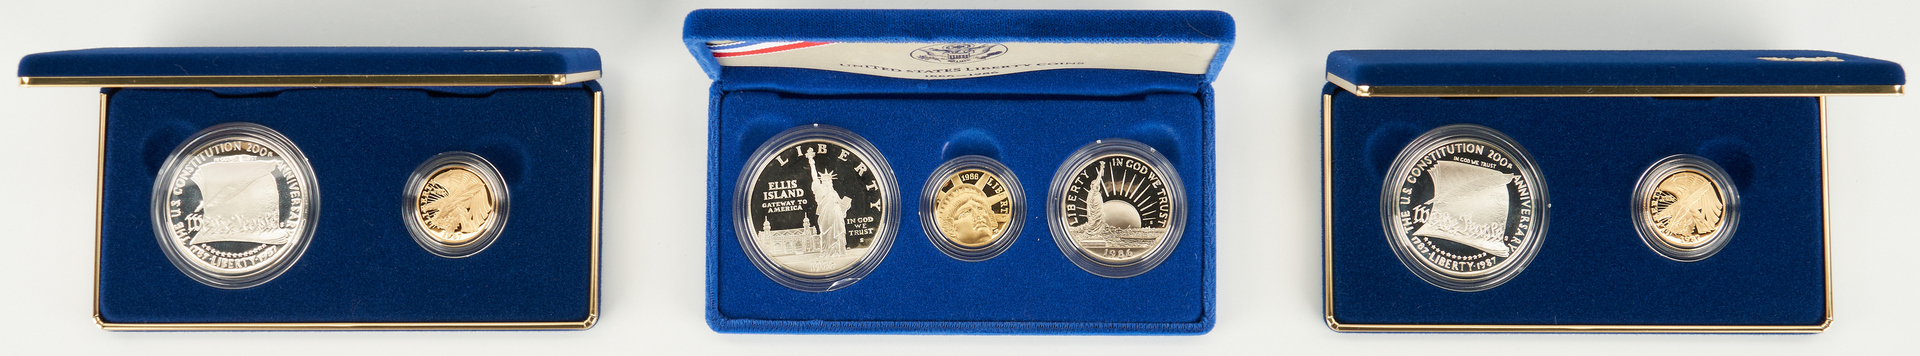 Lot 733: 3 US Coin Proof Sets, incl. 1987 Constitutional, 1986 Liberty